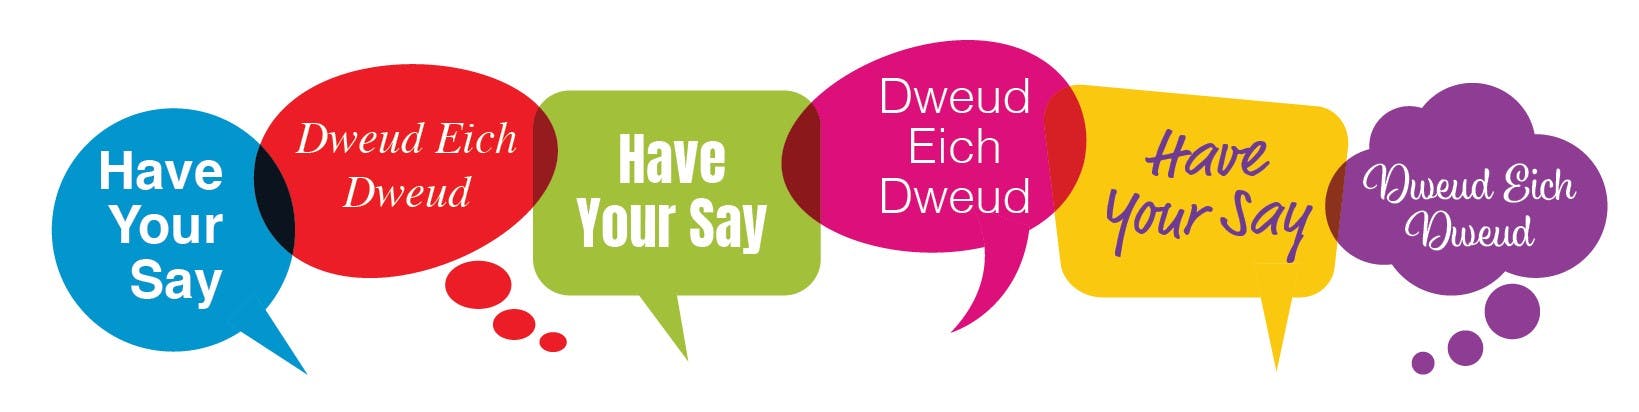 Banner graphic with speech bubbles saying "have your say" and "dweud eich dweud".